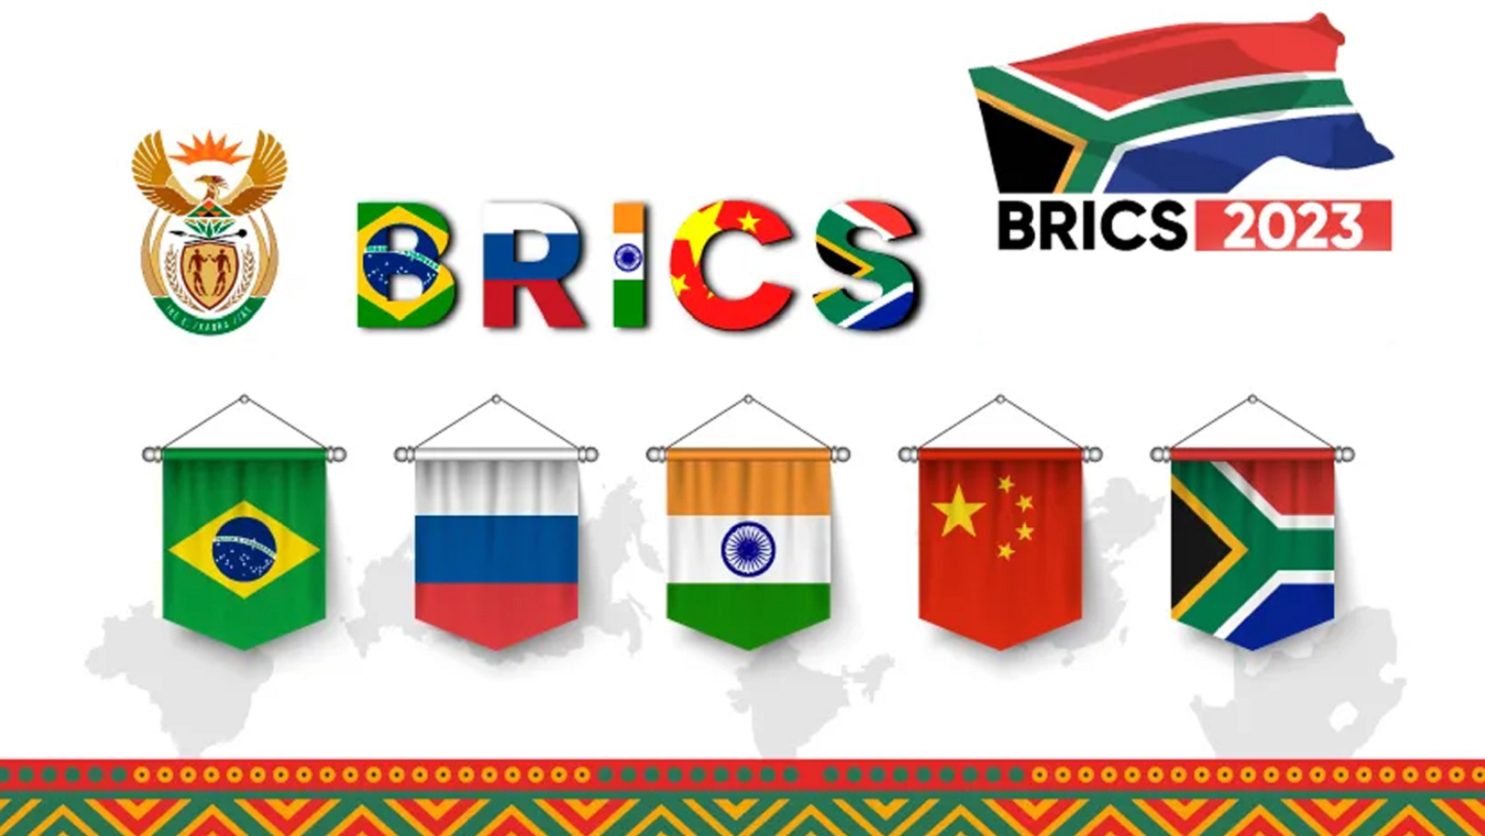 the poster for BRICS 2023 summit